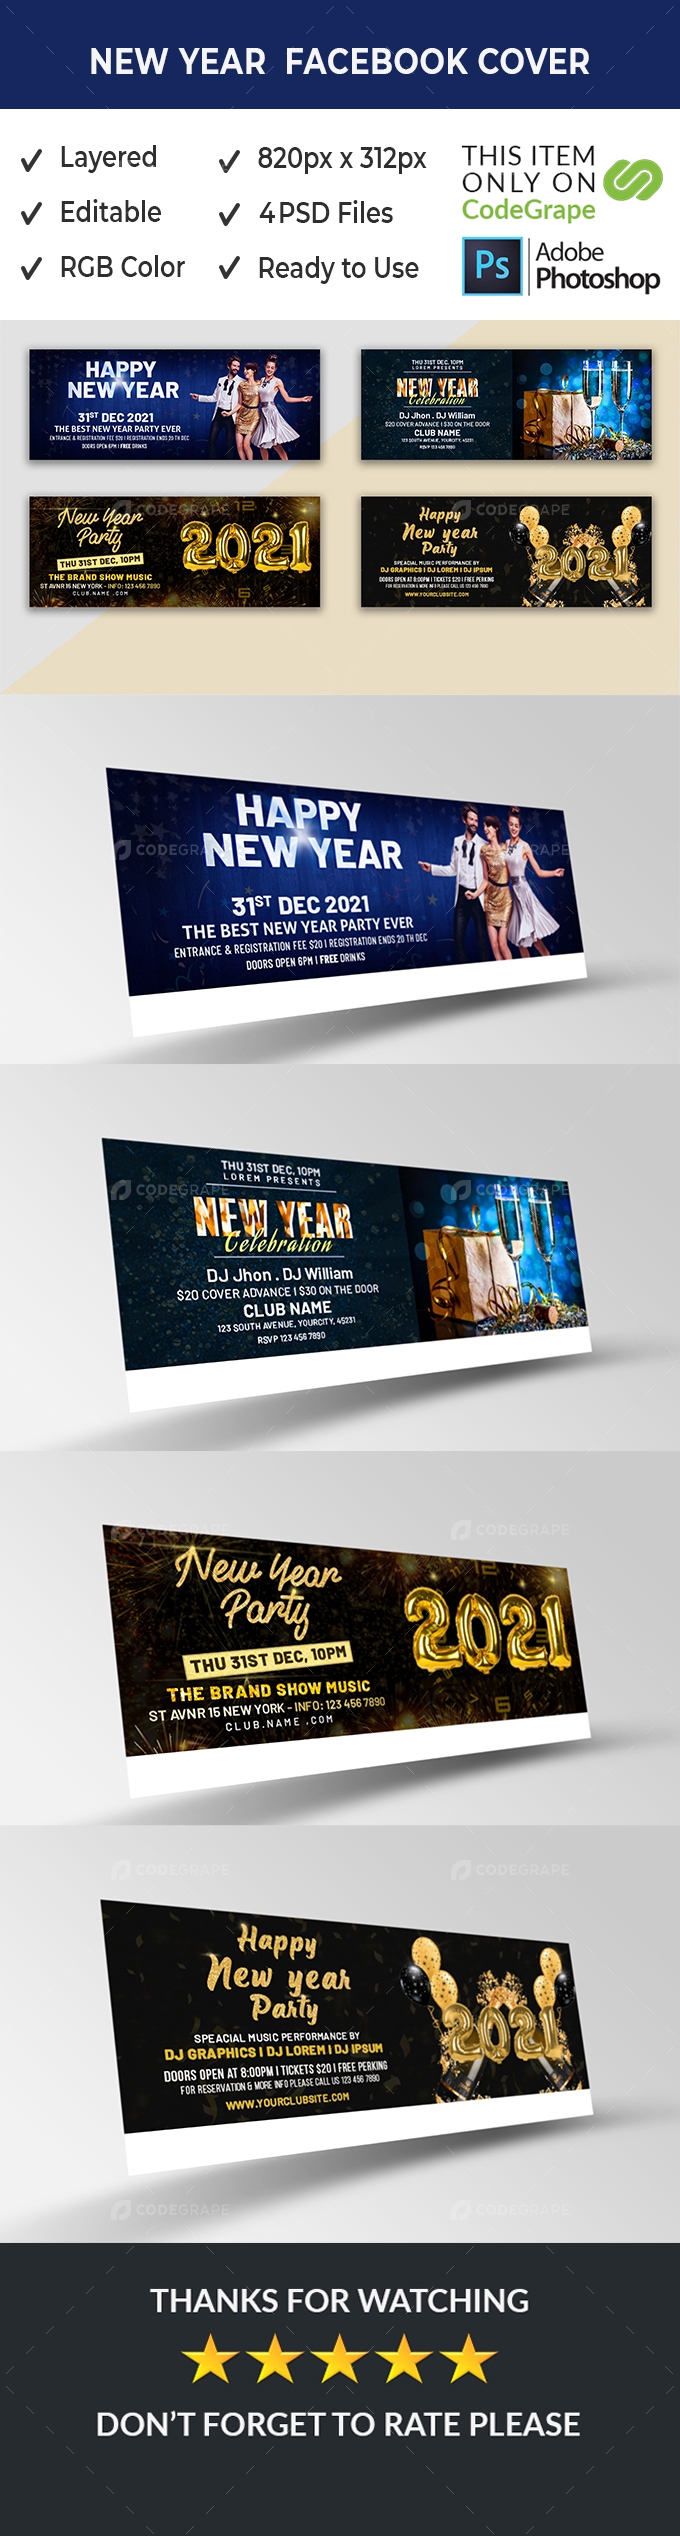 New Year Facebook Covers